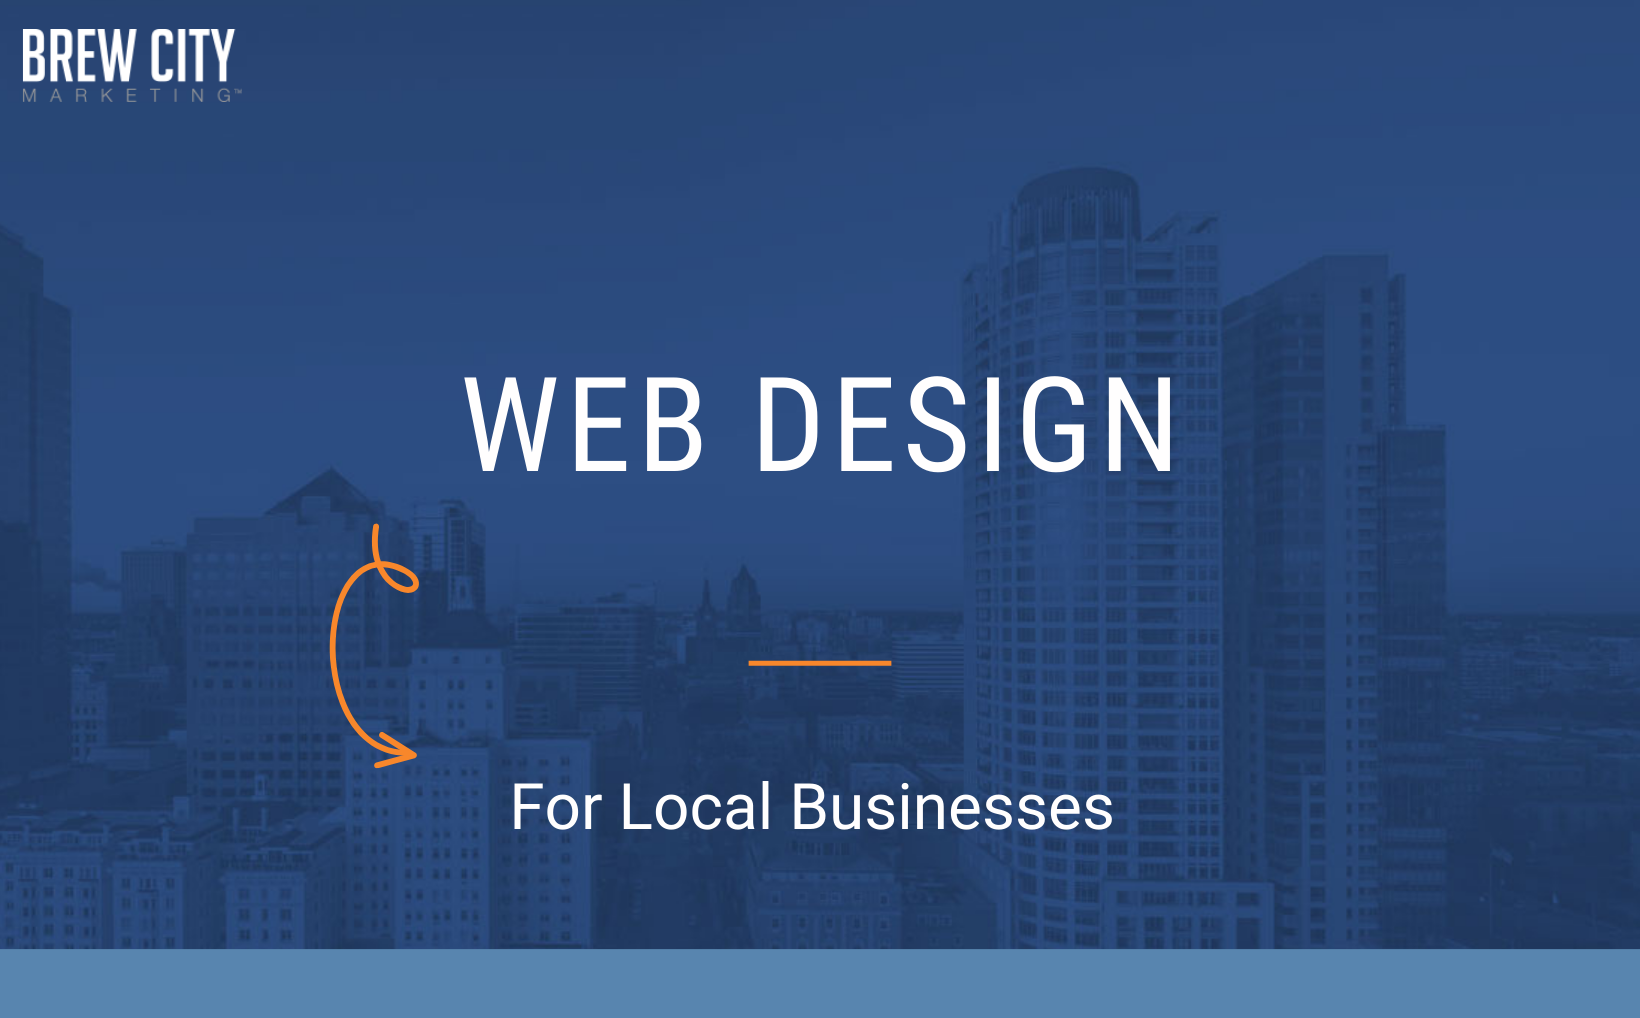 Web Design For Local Businesses